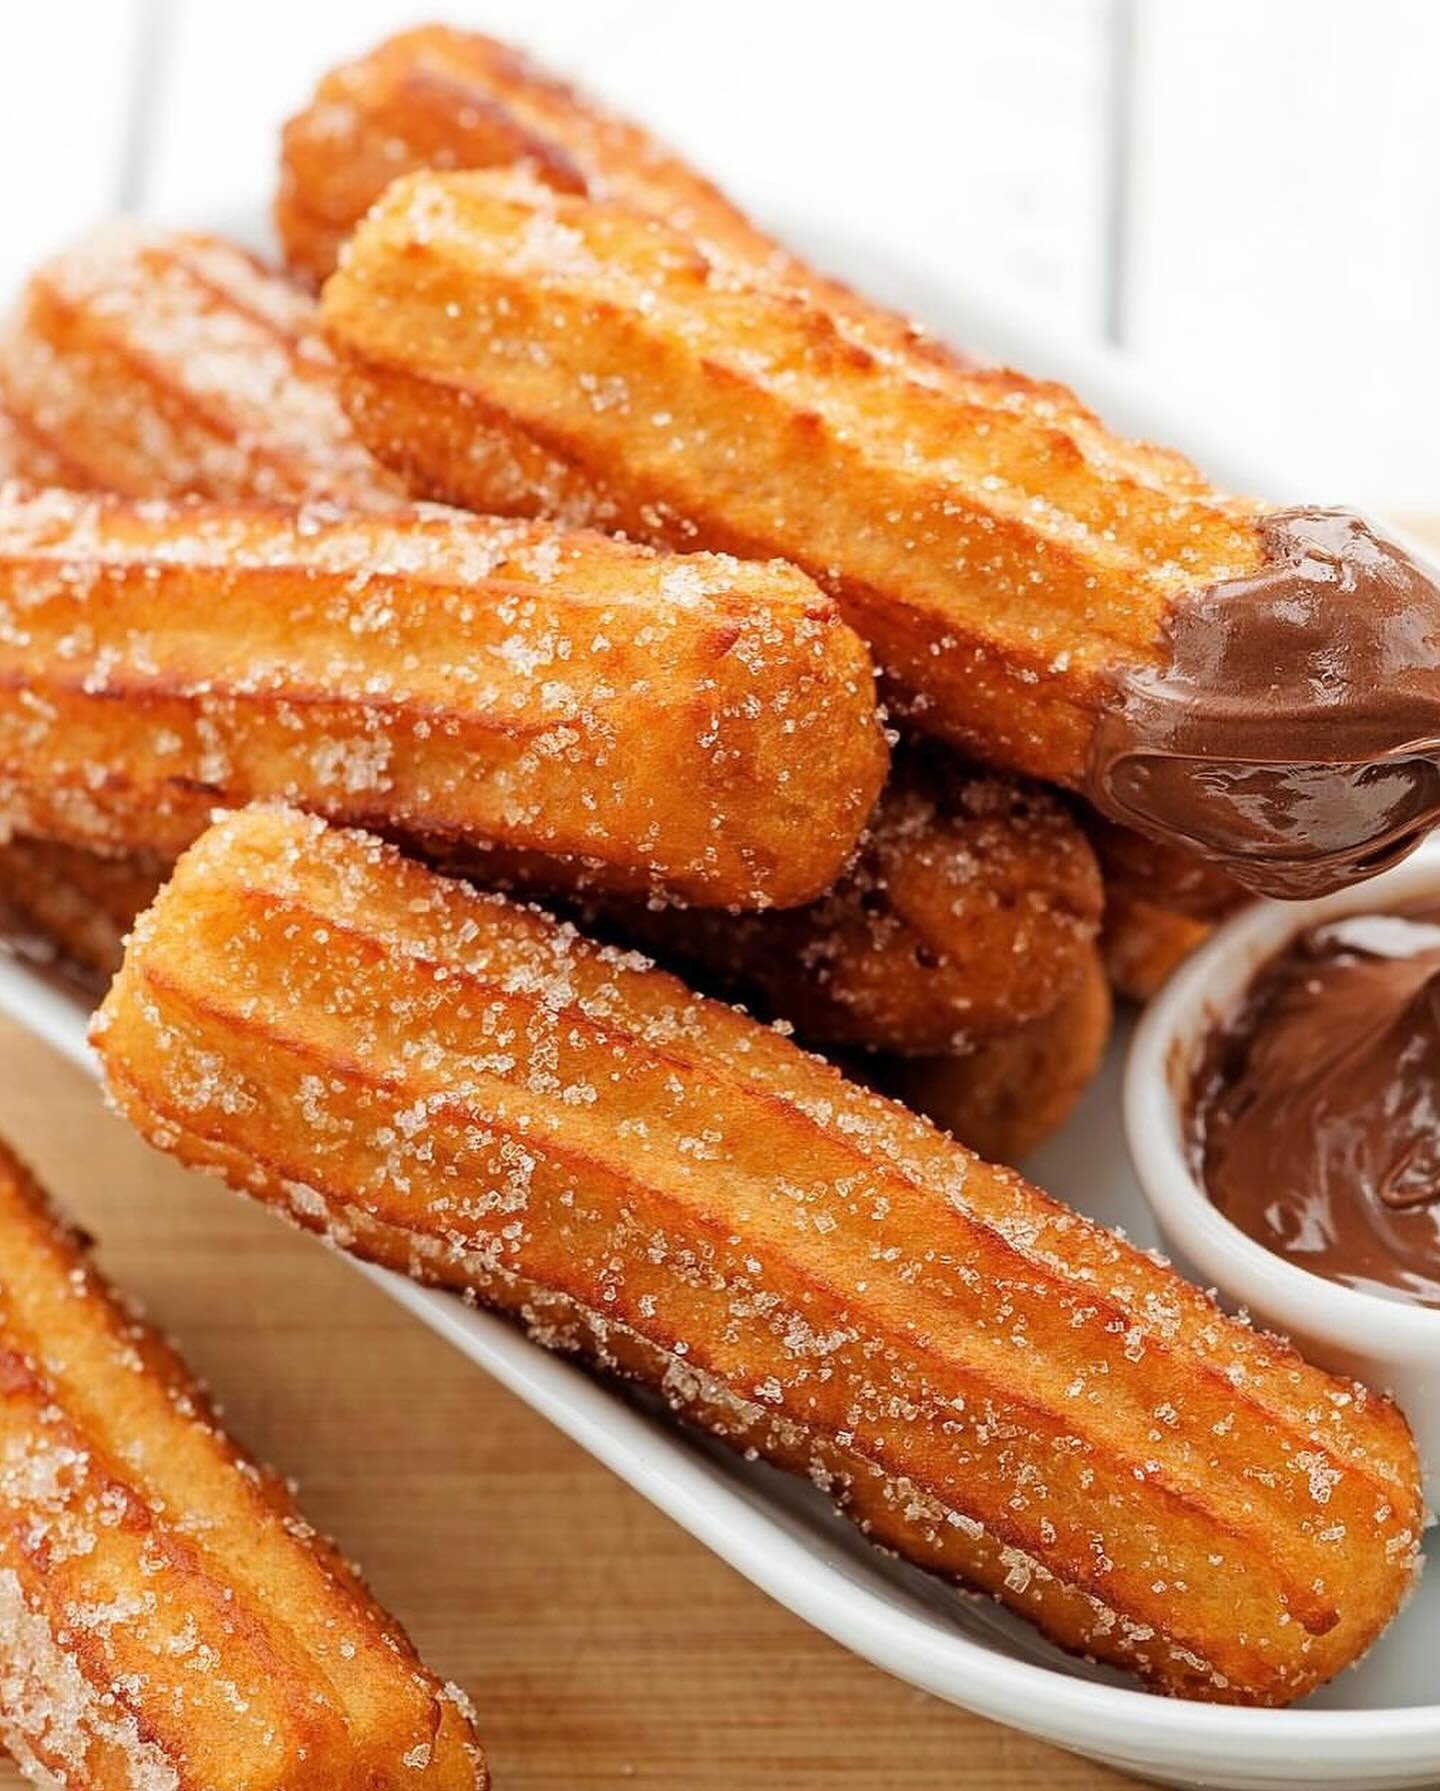 Ask about our dessert options : Golden churros, dusted with cinnamon sugar, served with a side of rich, velvety chocolate sauce for dipping 🍨✨

#themenu #catering #dessert #mexicanfood #foodtrucks #churros #gelato #choctops #icecream #foodtruck #foo